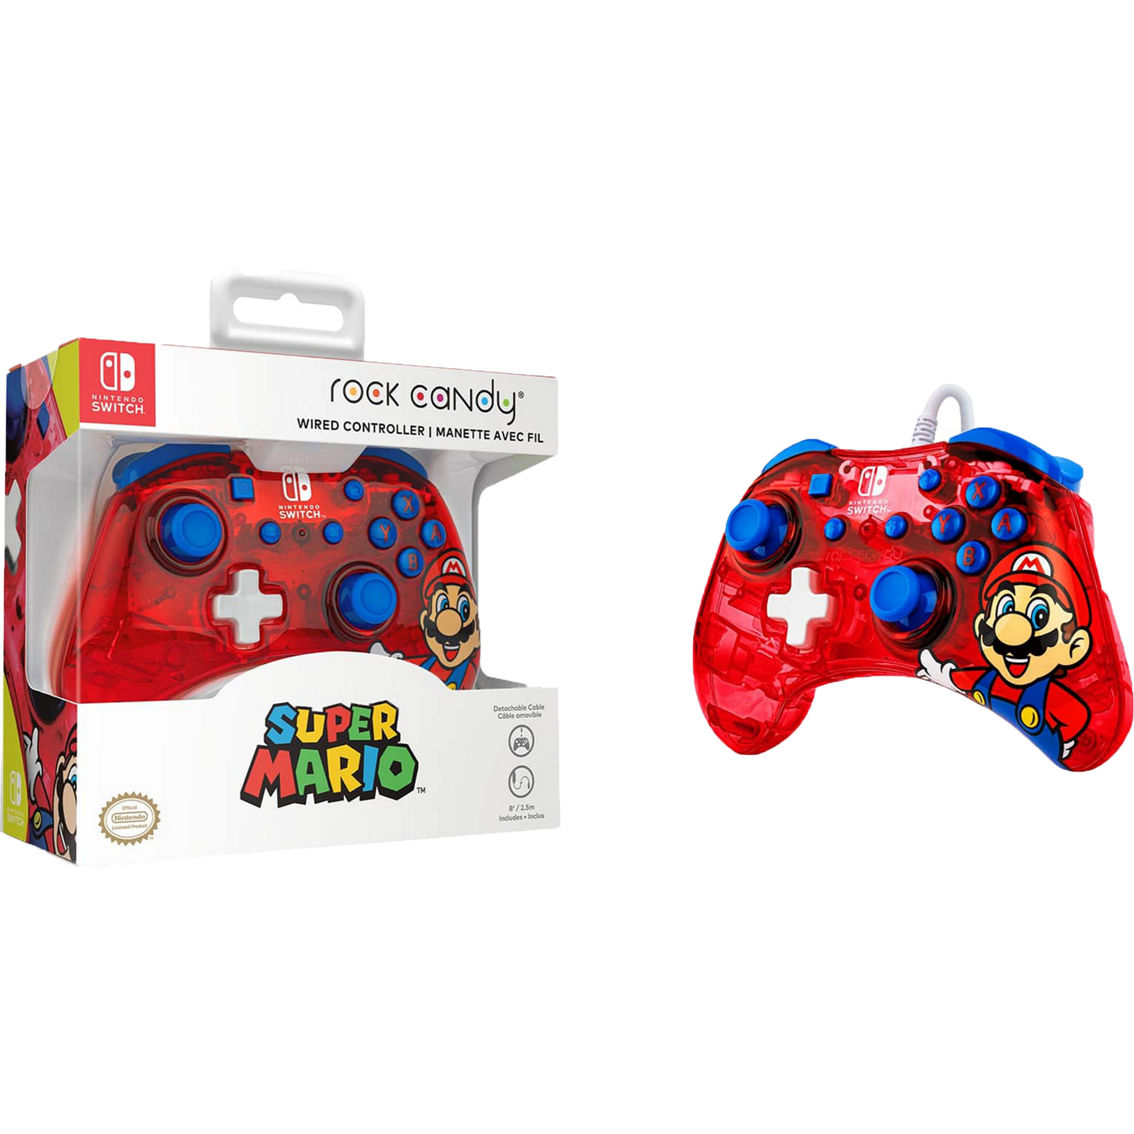 PDP Rock Candy Wired Controller: Mario Punch For Nintendo Switch - Image 9 of 9